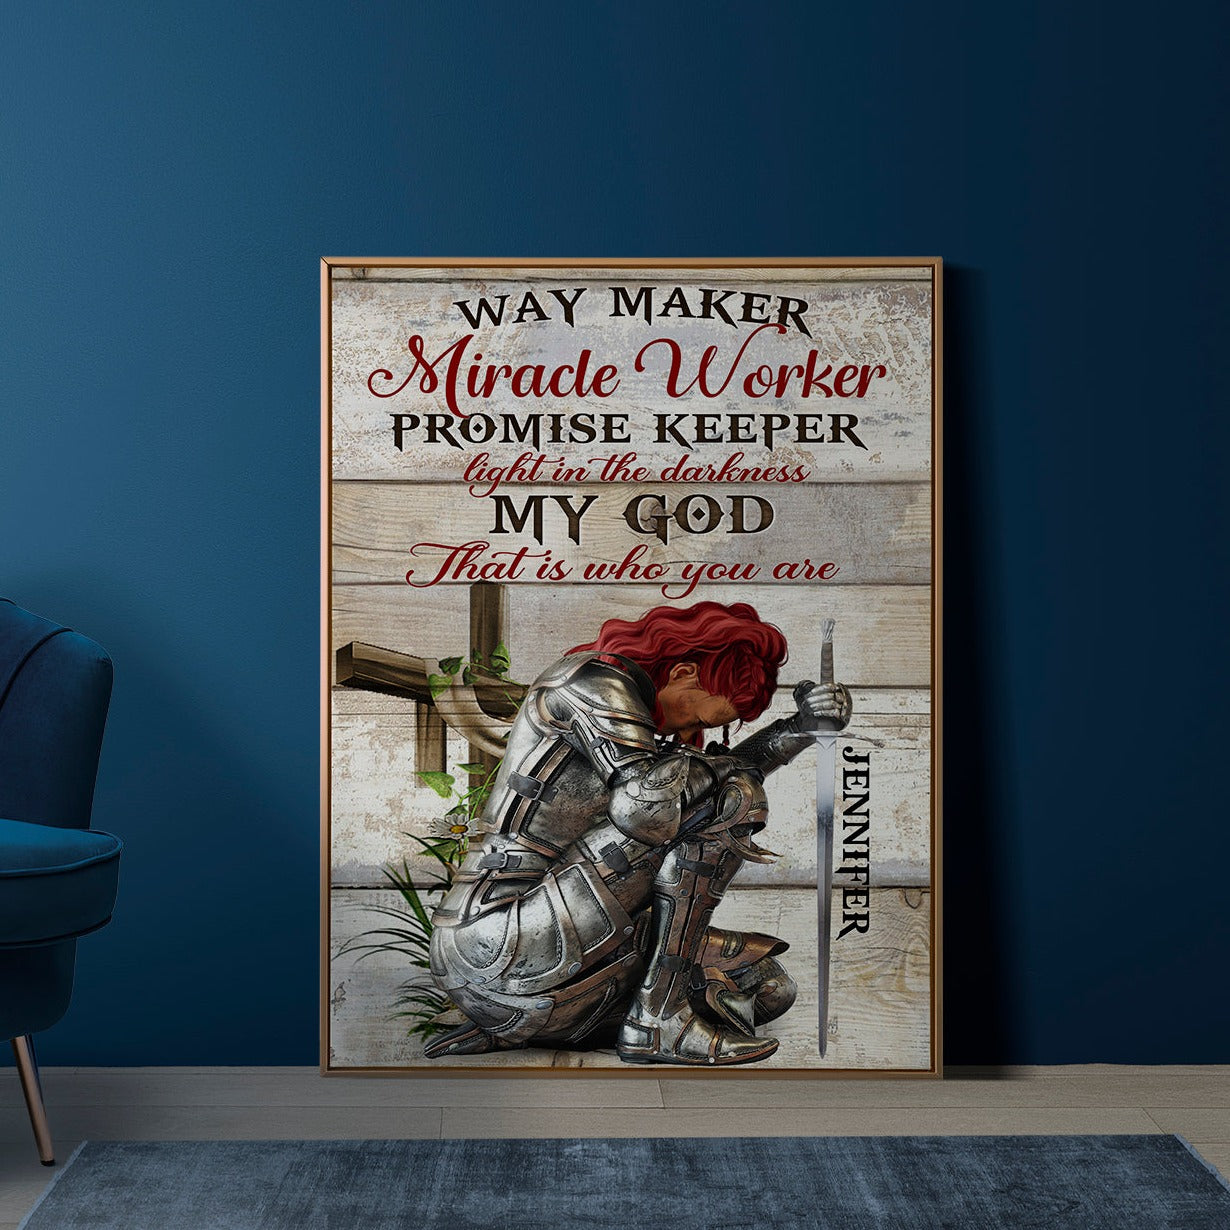 Personalized Woman Warrior Of God Way Maker Miracle Worker Promise Keeper Light In The Darkness My God That Is What You Are Poster